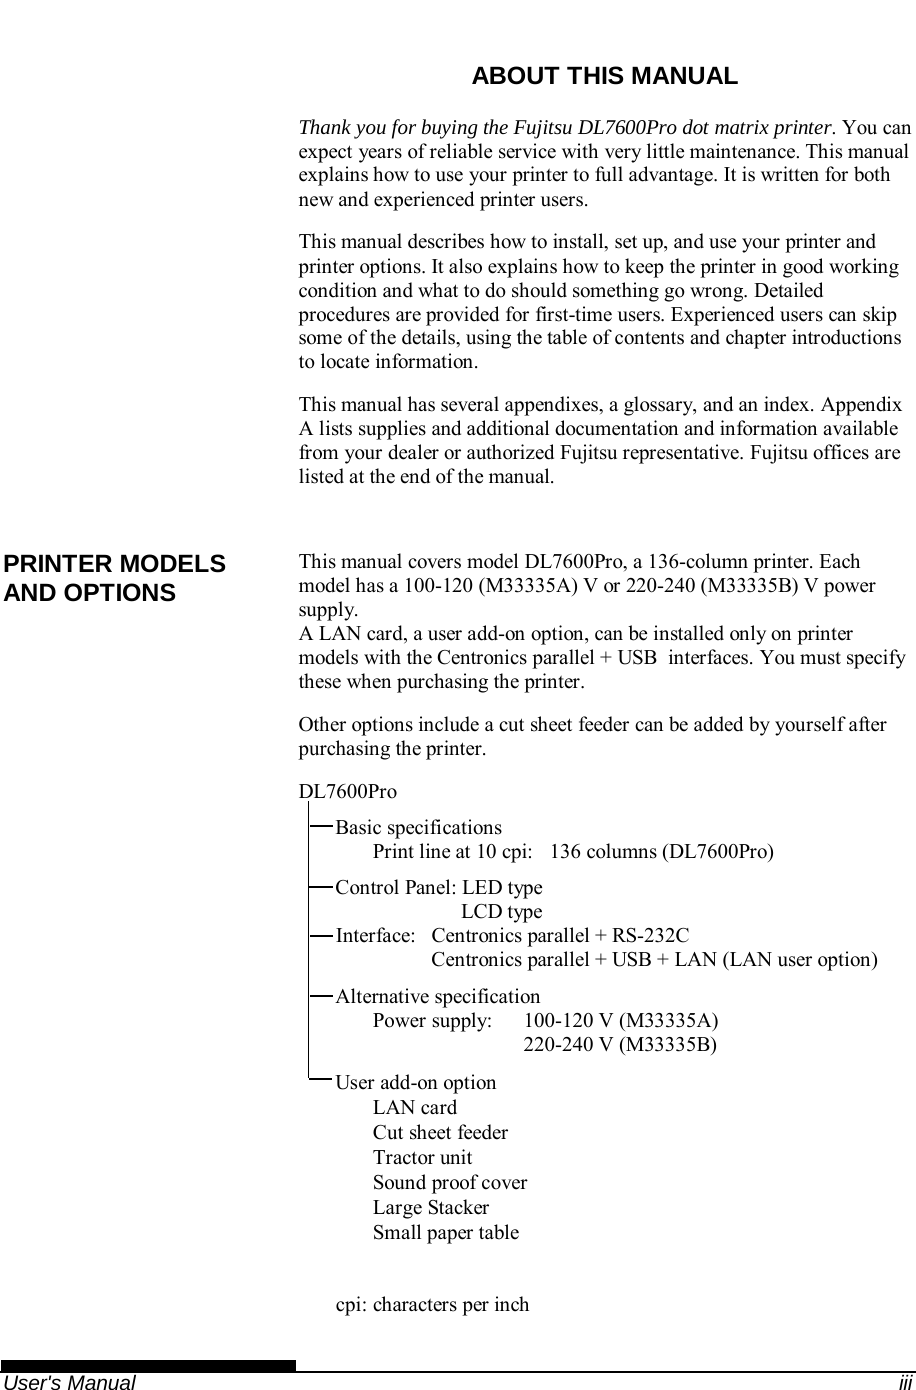    User&apos;s Manual  iii ABOUT THIS MANUAL Thank you for buying the Fujitsu DL7600Pro dot matrix printer. You can expect years of reliable service with very little maintenance. This manual explains how to use your printer to full advantage. It is written for both new and experienced printer users. This manual describes how to install, set up, and use your printer and printer options. It also explains how to keep the printer in good working condition and what to do should something go wrong. Detailed procedures are provided for first-time users. Experienced users can skip some of the details, using the table of contents and chapter introductions to locate information. This manual has several appendixes, a glossary, and an index. Appendix A lists supplies and additional documentation and information available from your dealer or authorized Fujitsu representative. Fujitsu offices are listed at the end of the manual.  This manual covers model DL7600Pro, a 136-column printer. Each model has a 100-120 (M33335A) V or 220-240 (M33335B) V power supply. A LAN card, a user add-on option, can be installed only on printer models with the Centronics parallel + USB  interfaces. You must specify these when purchasing the printer. Other options include a cut sheet feeder can be added by yourself after purchasing the printer. DL7600Pro Basic specifications Print line at 10 cpi:  136 columns (DL7600Pro) Control Panel: LED type                         LCD type Interface:  Centronics parallel + RS-232C   Centronics parallel + USB + LAN (LAN user option) Alternative specification Power supply:   100-120 V (M33335A)   220-240 V (M33335B) User add-on option LAN card Cut sheet feeder Tractor unit Sound proof cover  Large Stacker  Small paper table  cpi: characters per inch PRINTER MODELS AND OPTIONS 